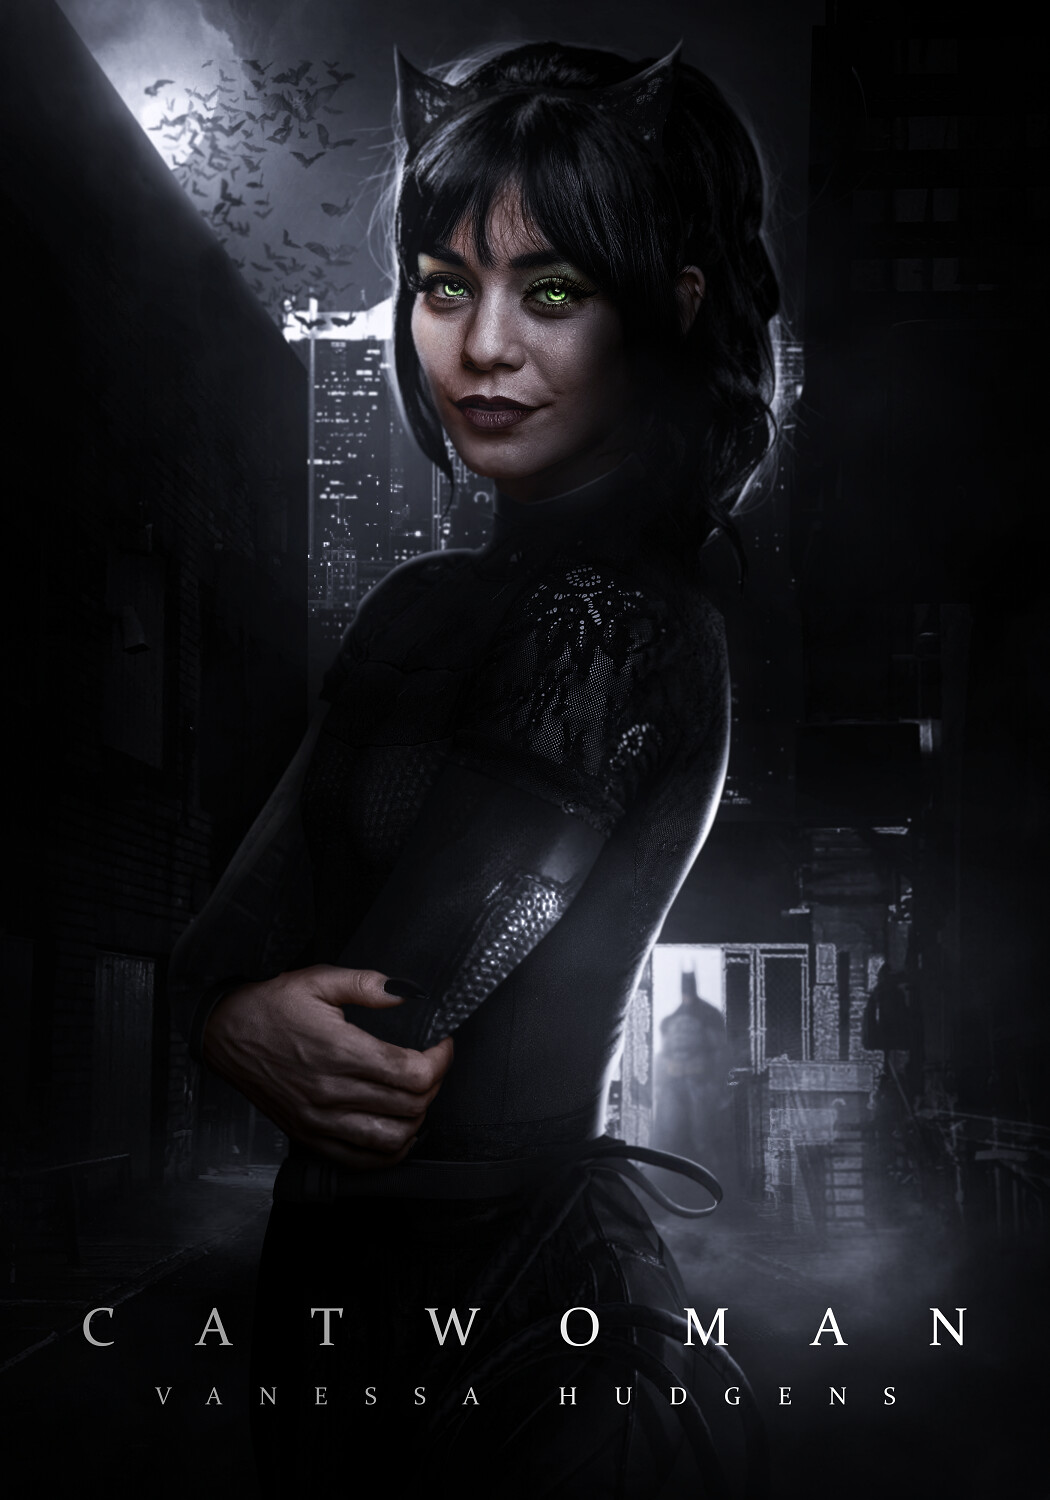 Theres been a rumor going around that Vanessa Hudgens might play Catwoman i...